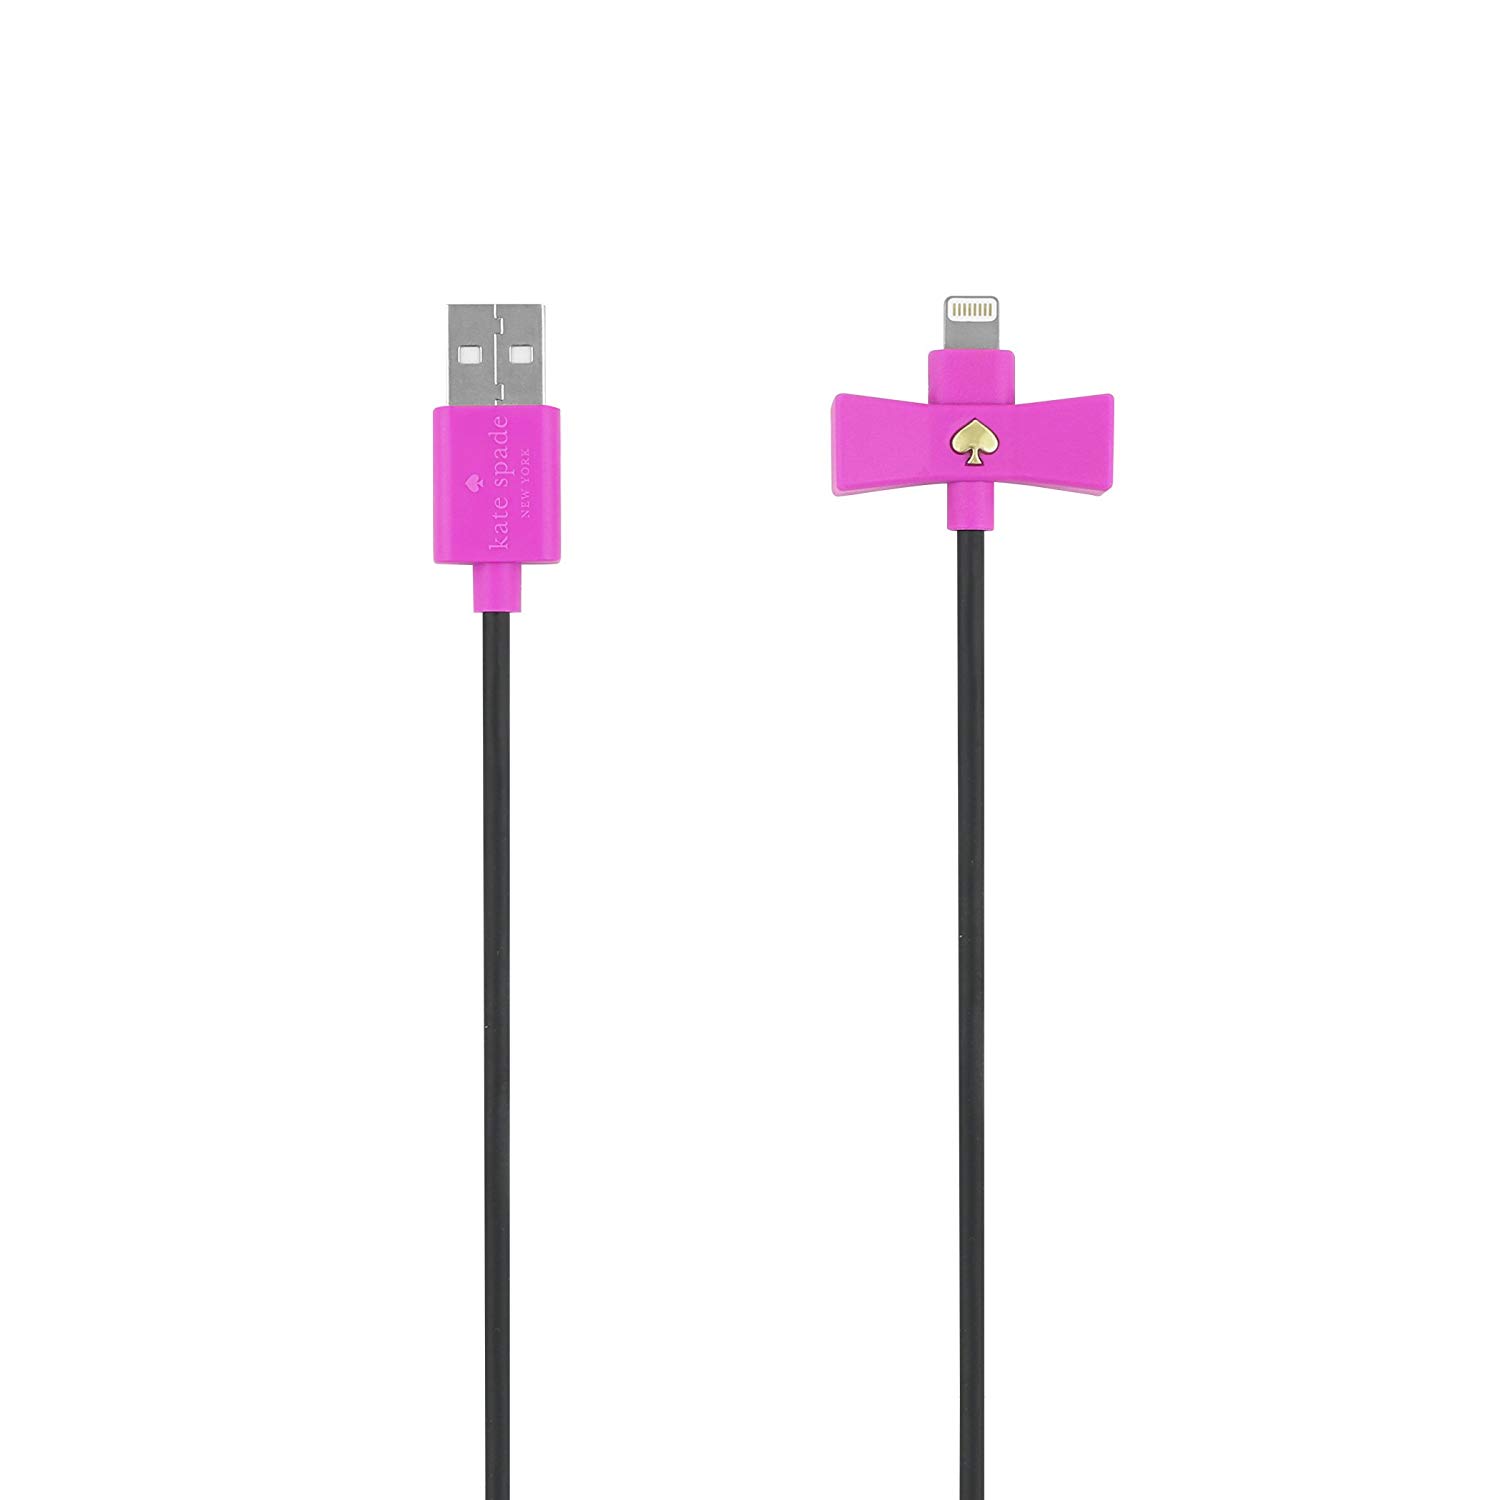 Kate Spade New York Bow Charge/Sync Cable | POWERSOLUTIONS